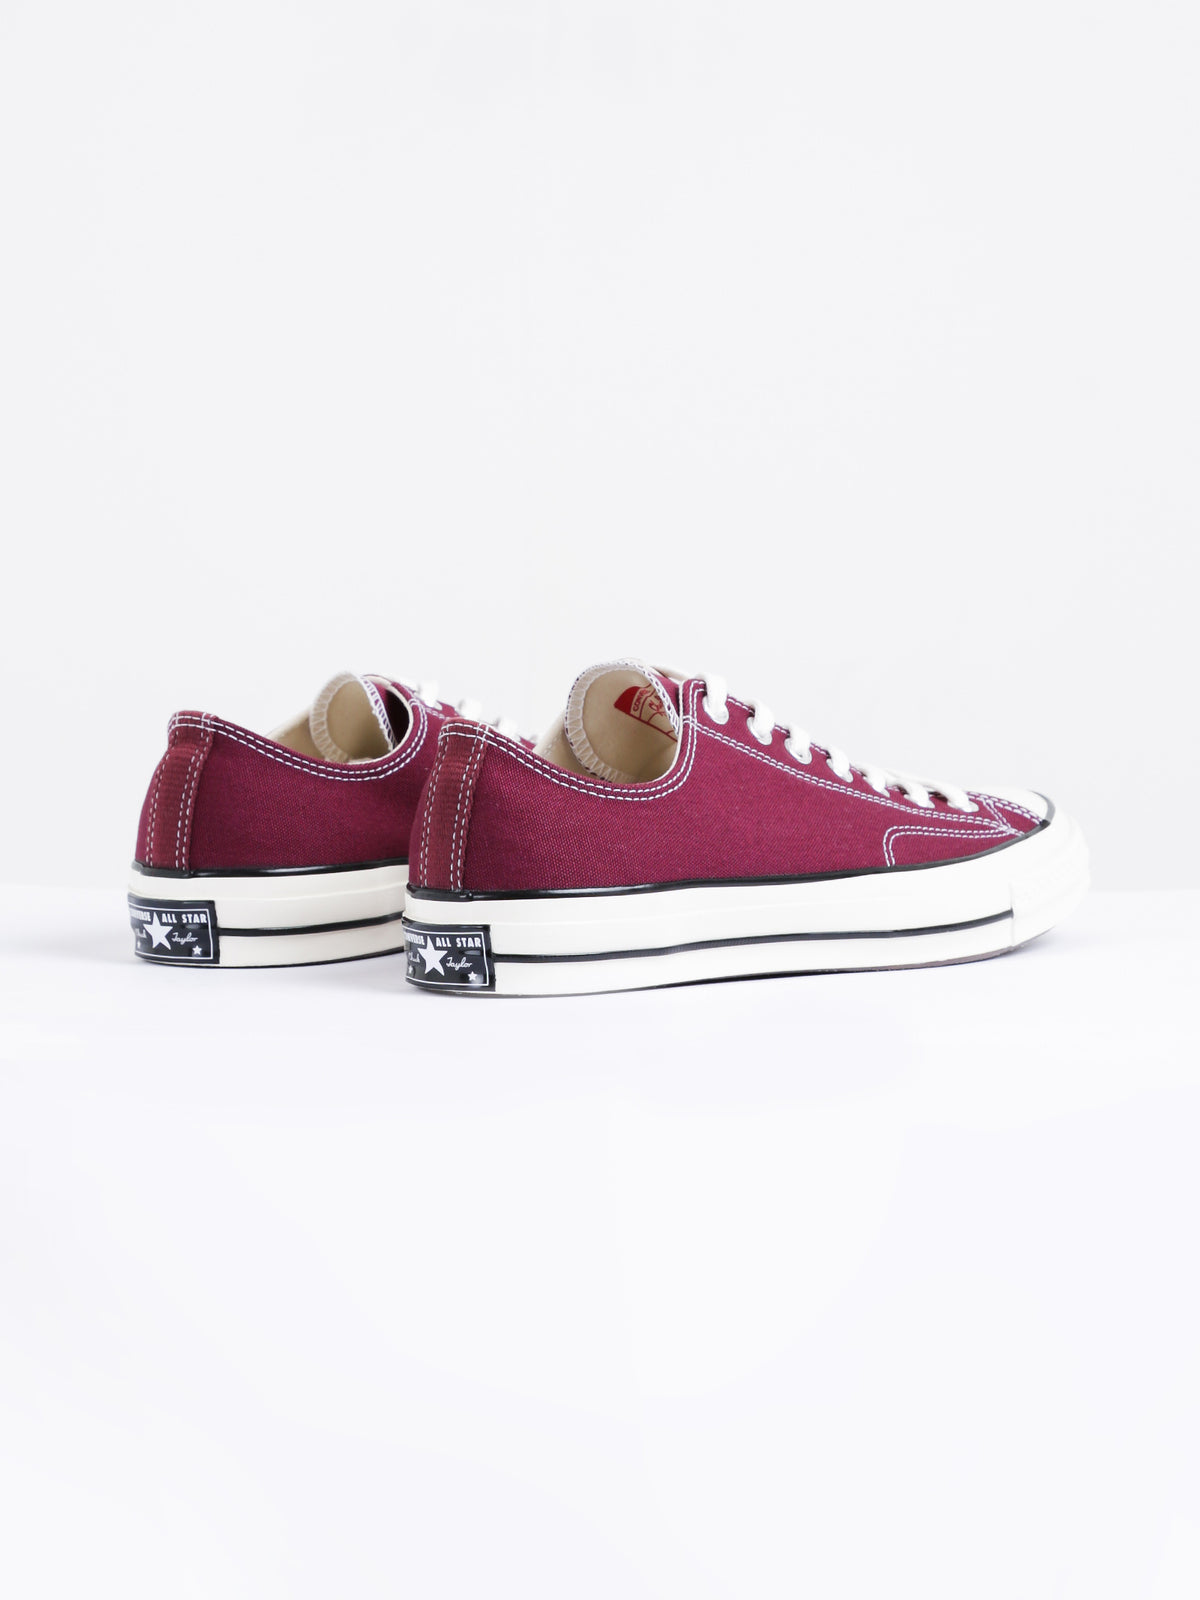 Mens Chuck Taylor All Star Low Top Sneakers in Obsidian Red